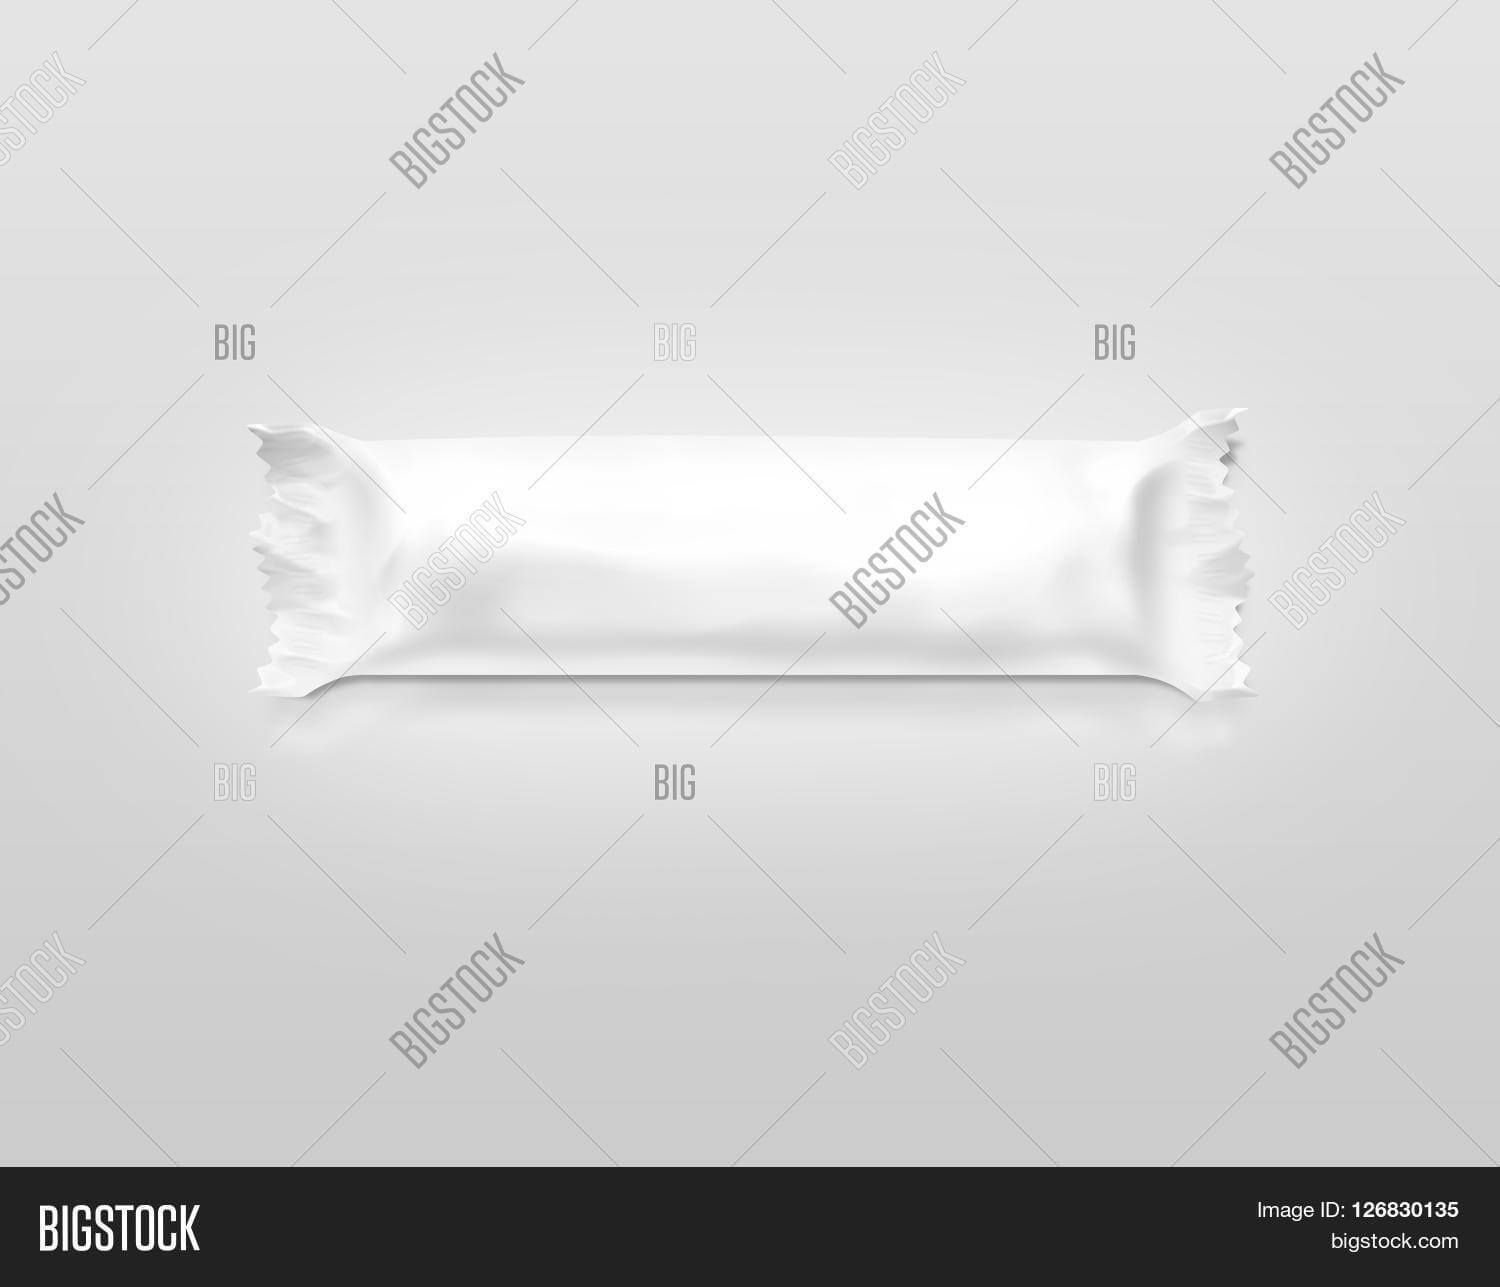 Blank White Candy Bar Image & Photo (Free Trial) | Bigstock In Blank Candy Bar Wrapper Template